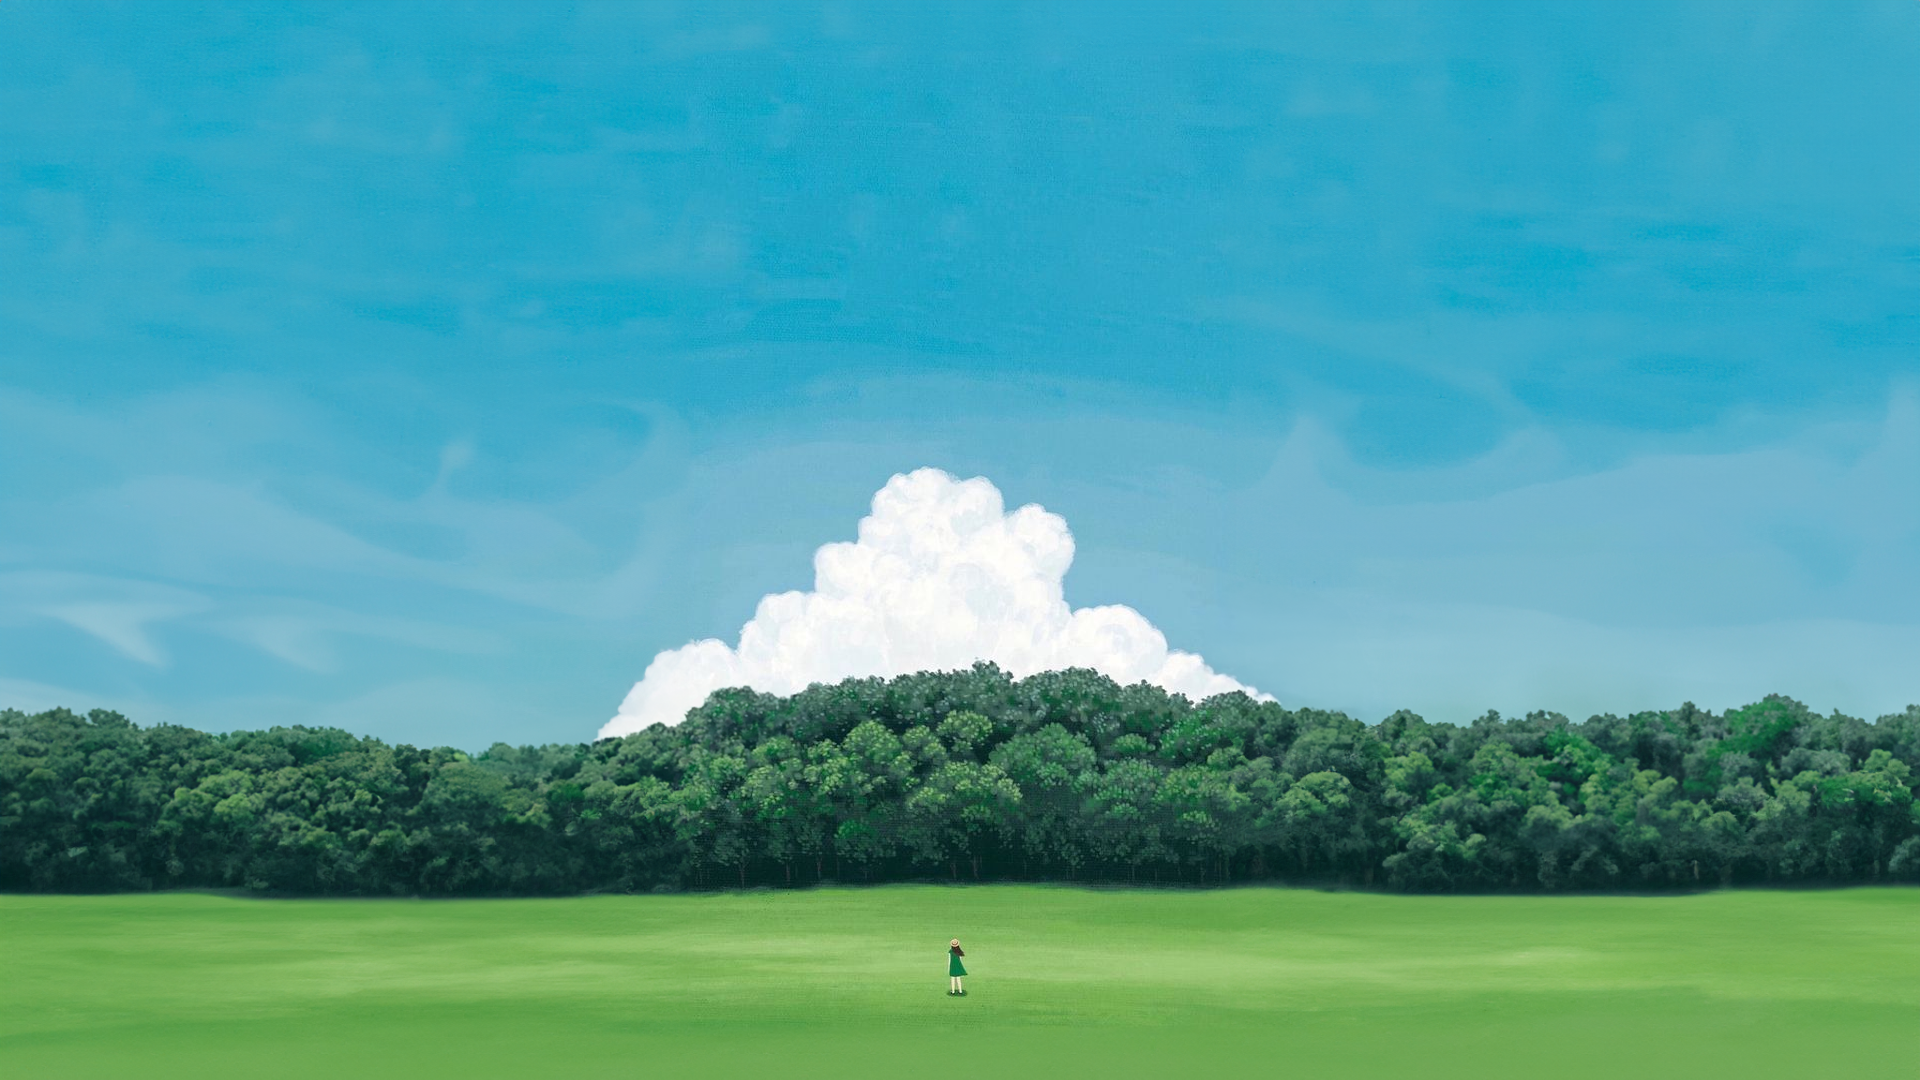 General 1920x1080 ground grass clouds minimalism simple background sky hat forest trees